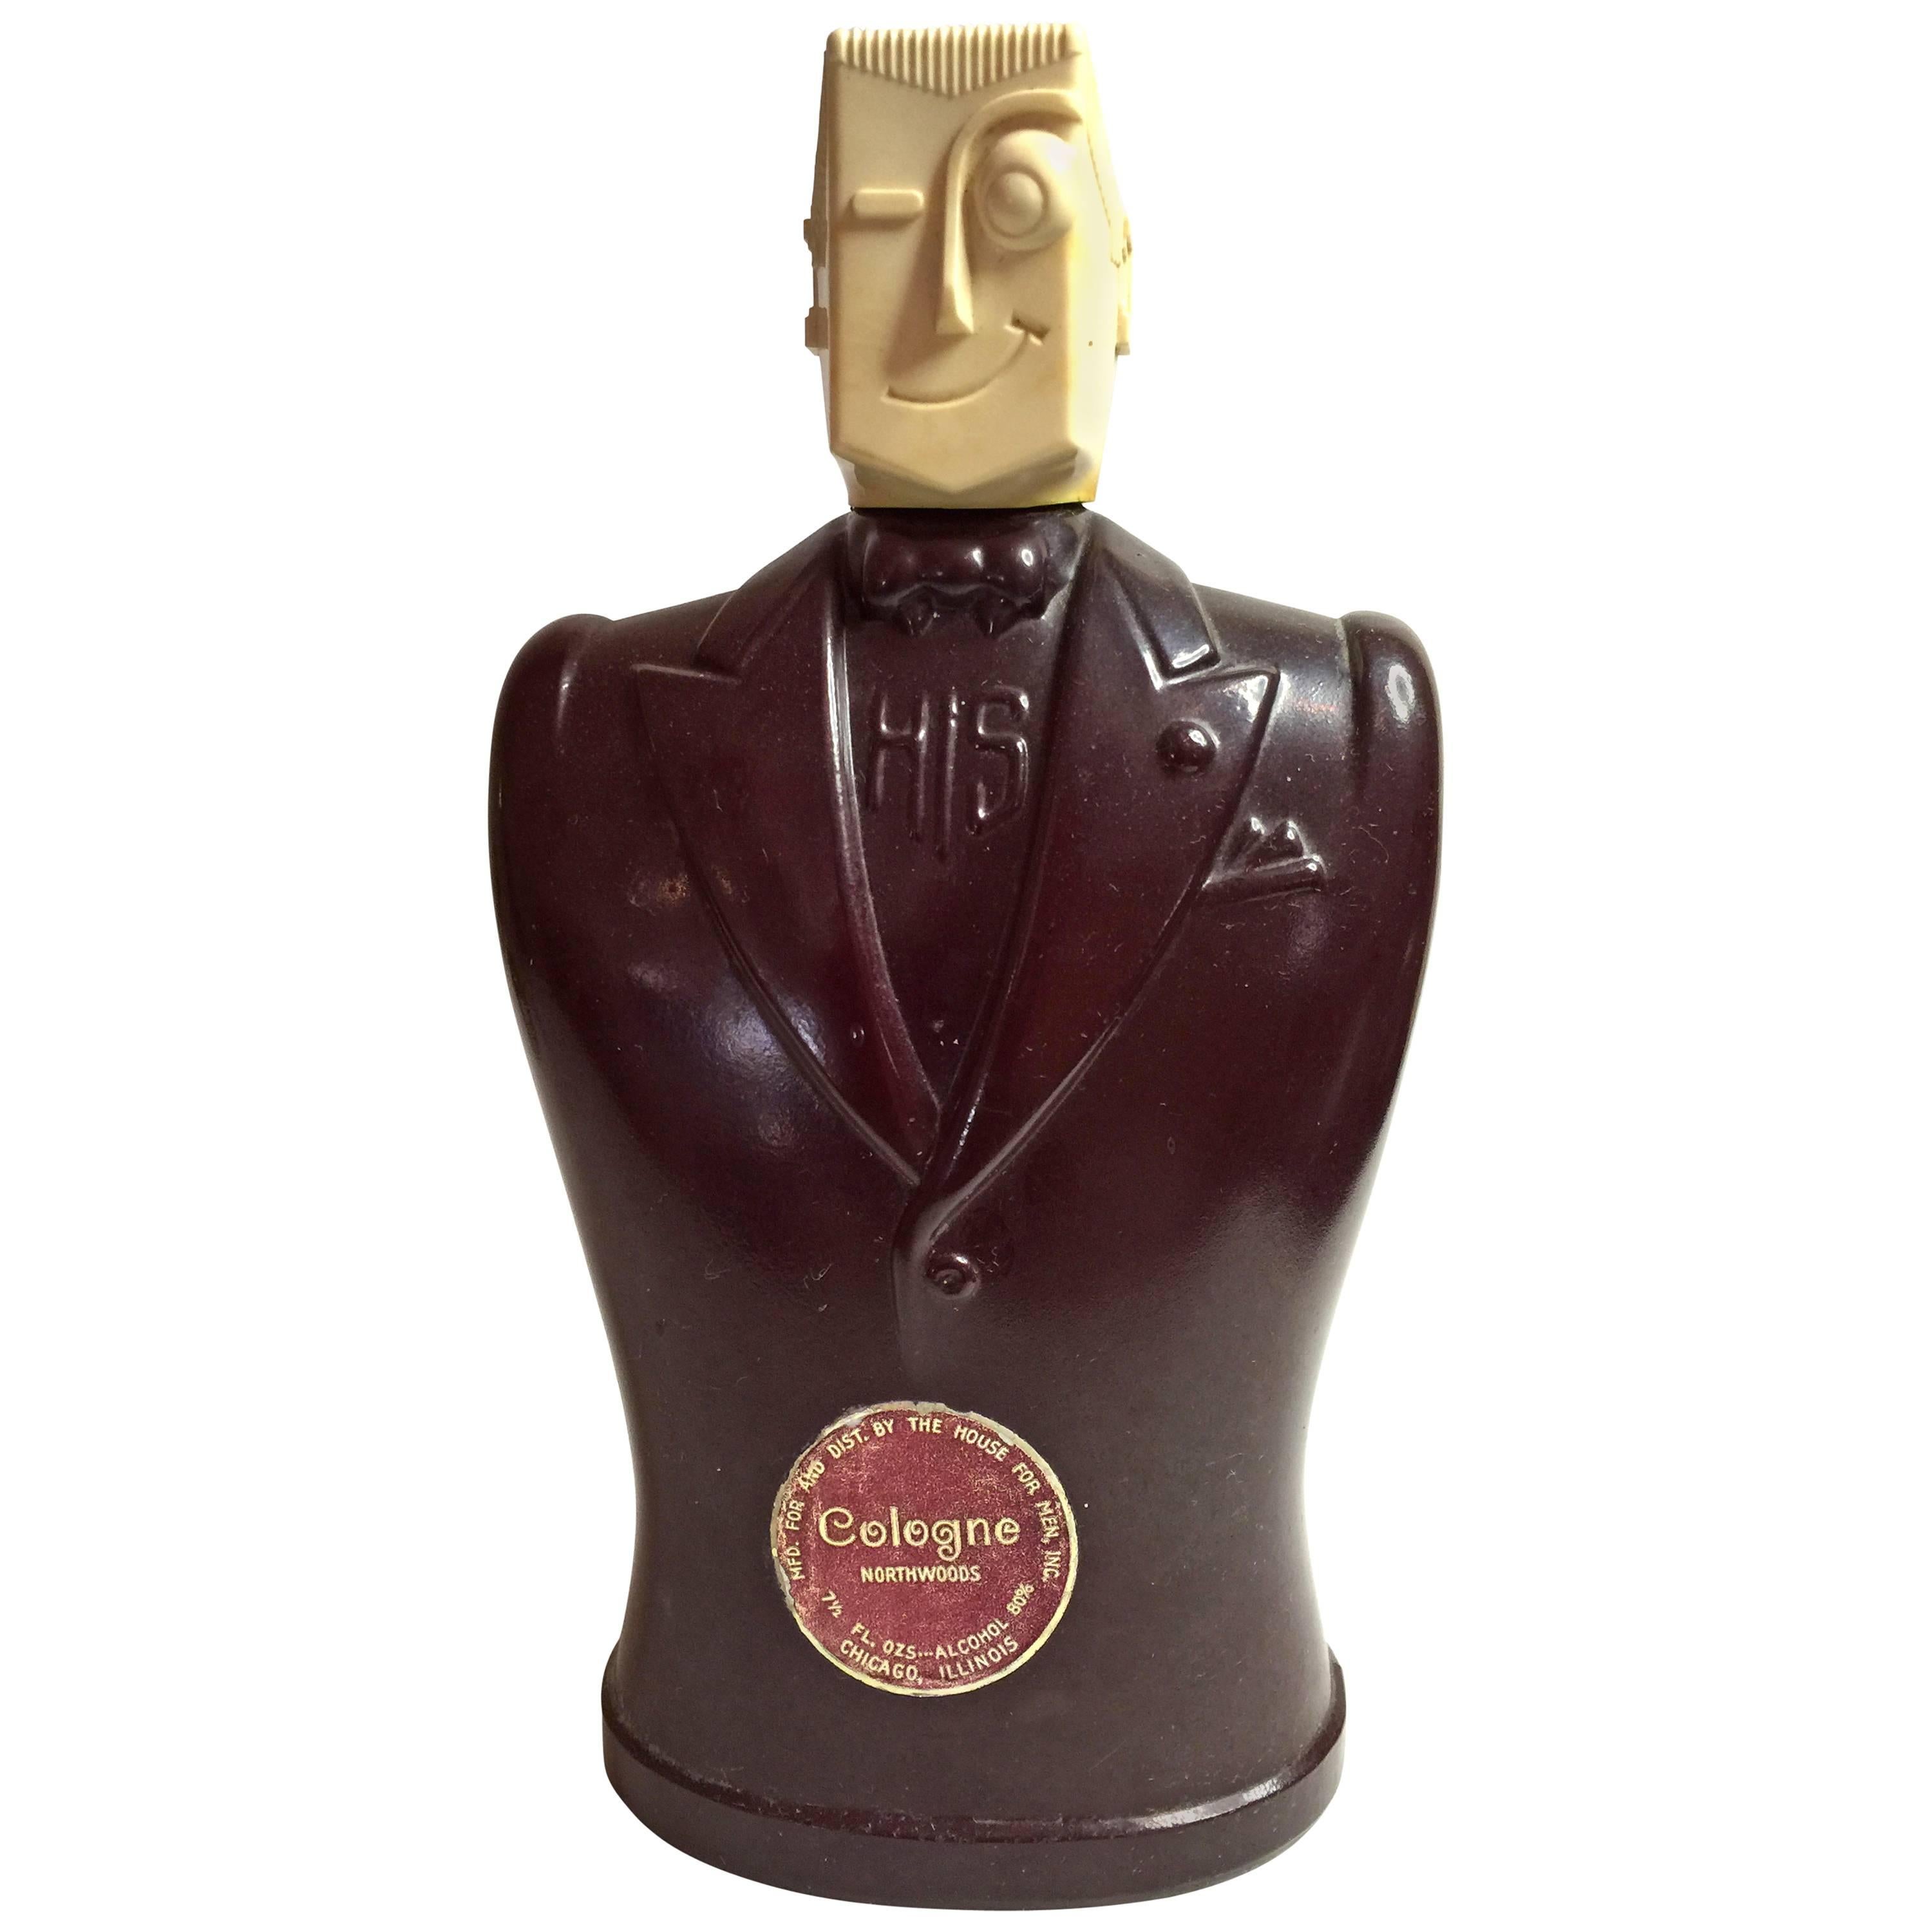 1940s Figural Glass and Hard plastic Art Deco "Winking Man" HIS Cologne Bottle For Sale